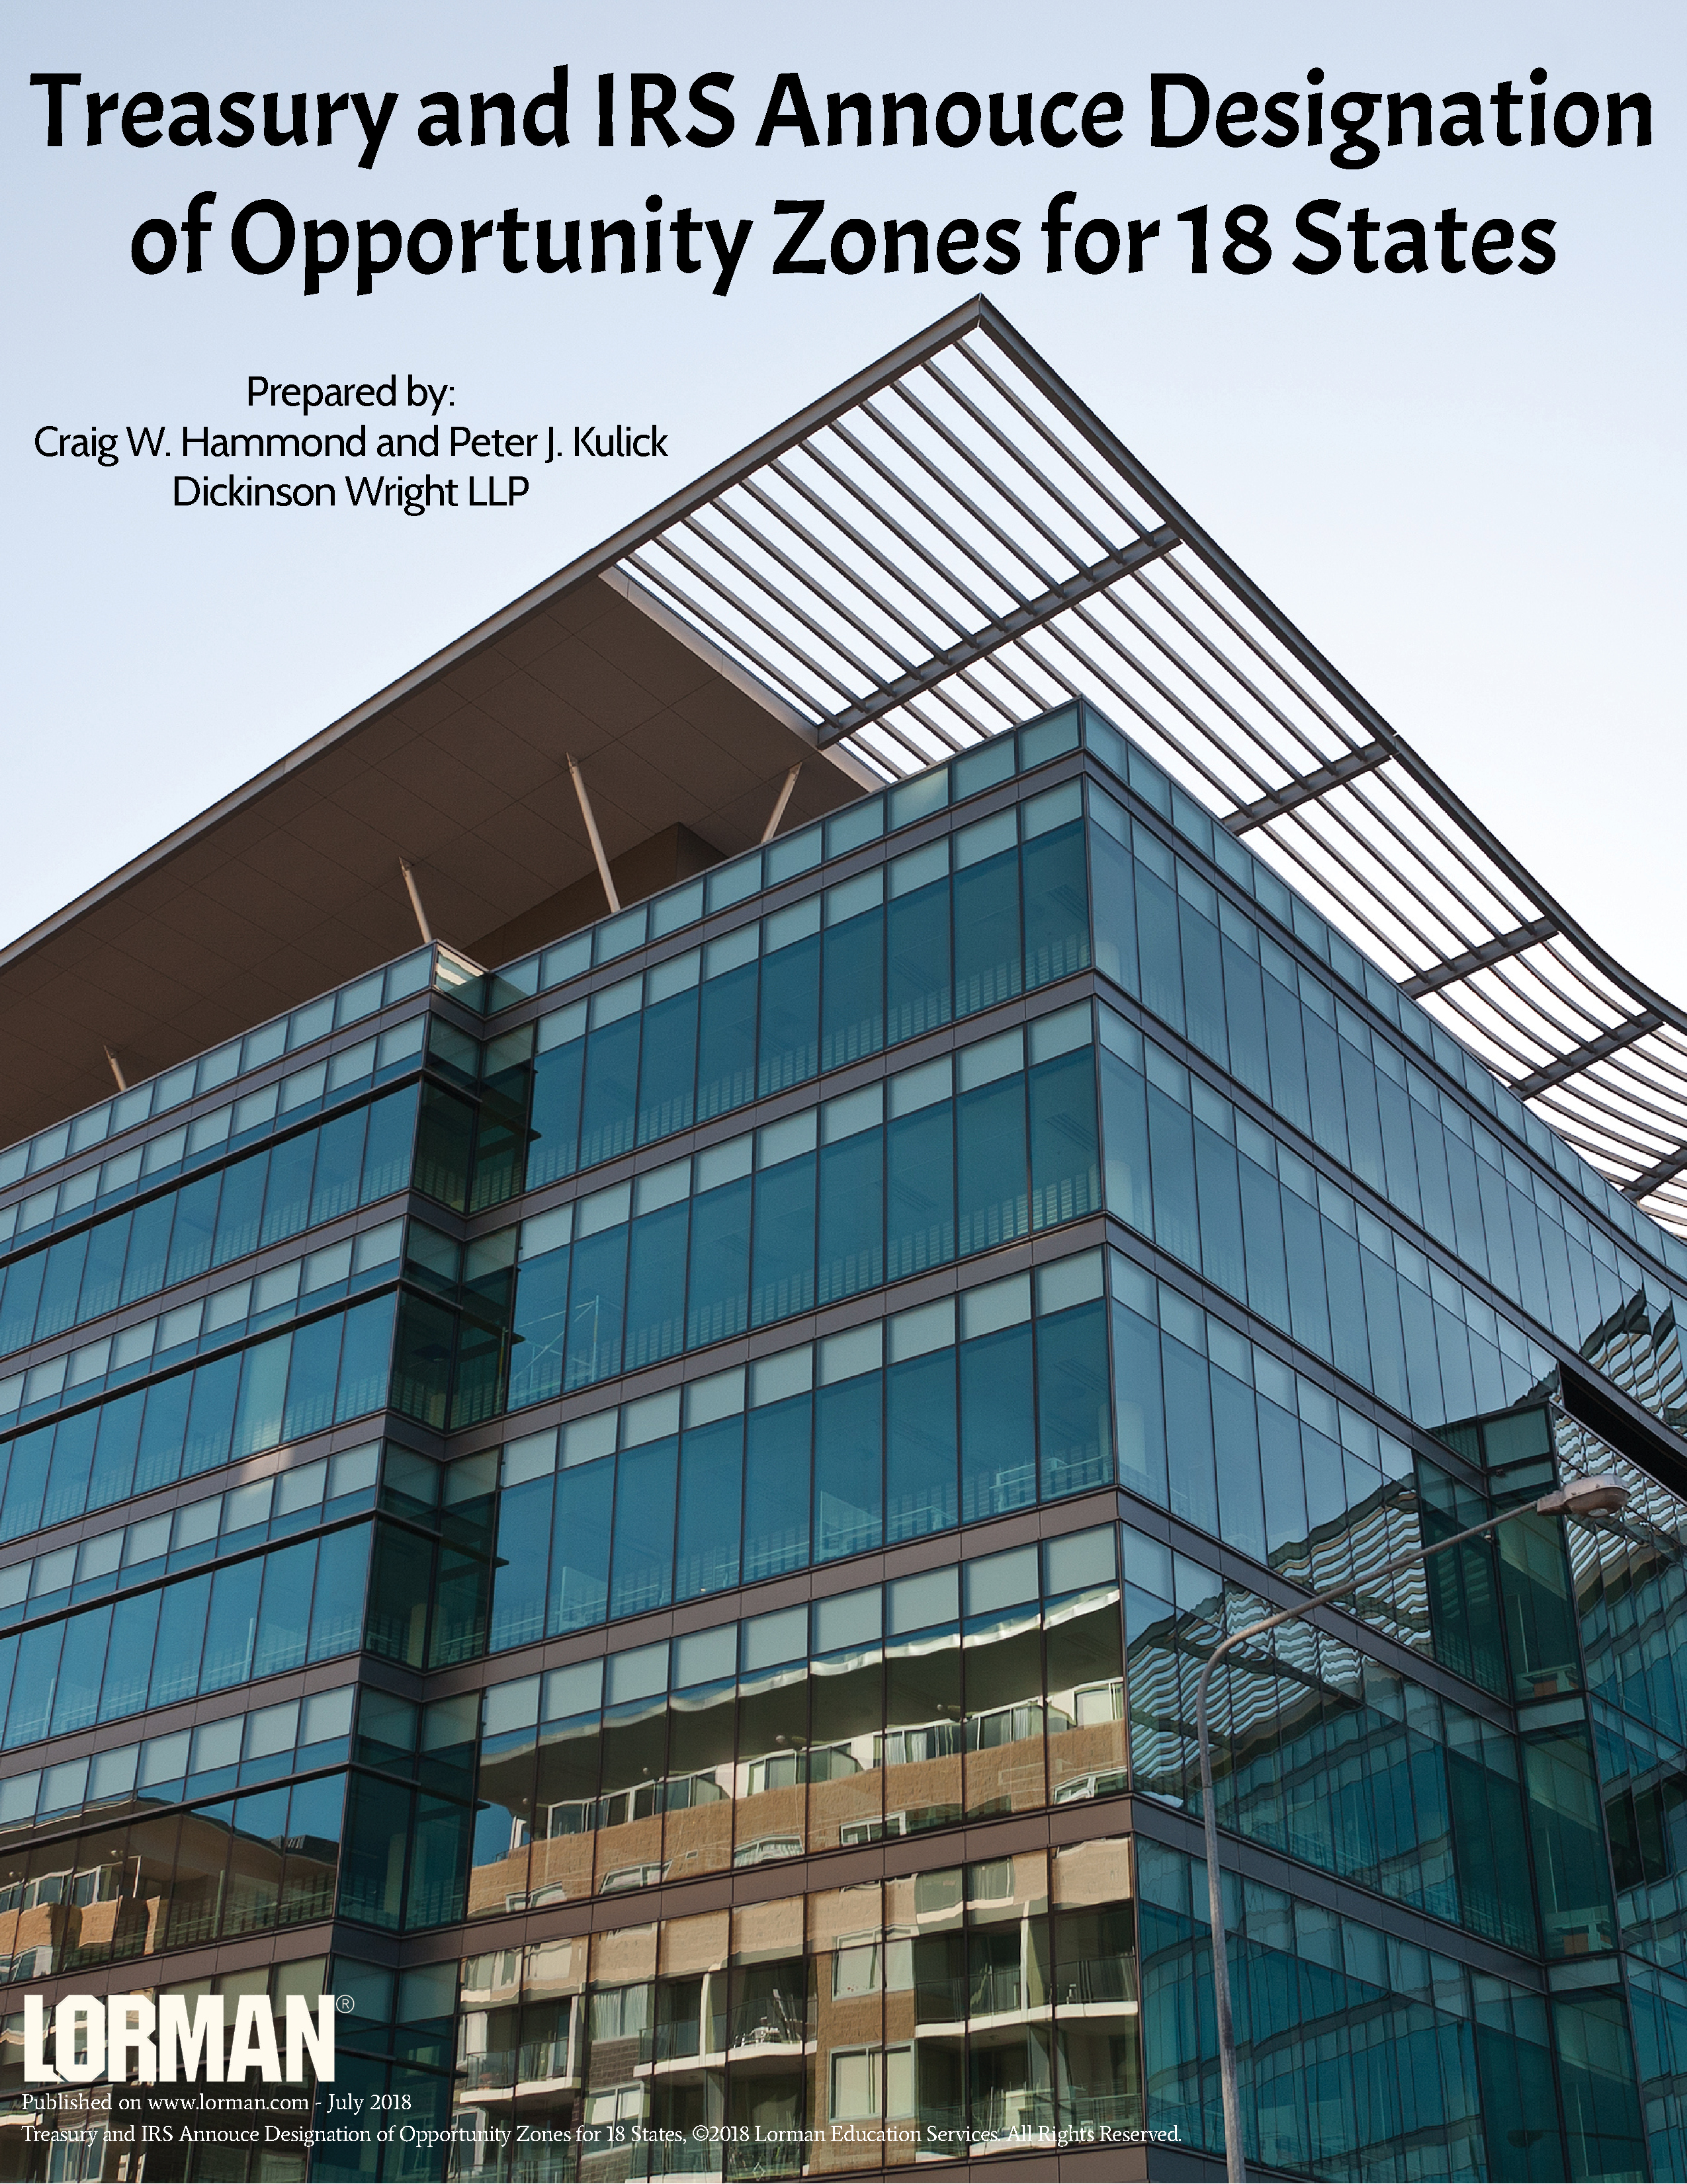 Treasury and IRS Annouce Designation of Opportunity Zones for 18 States